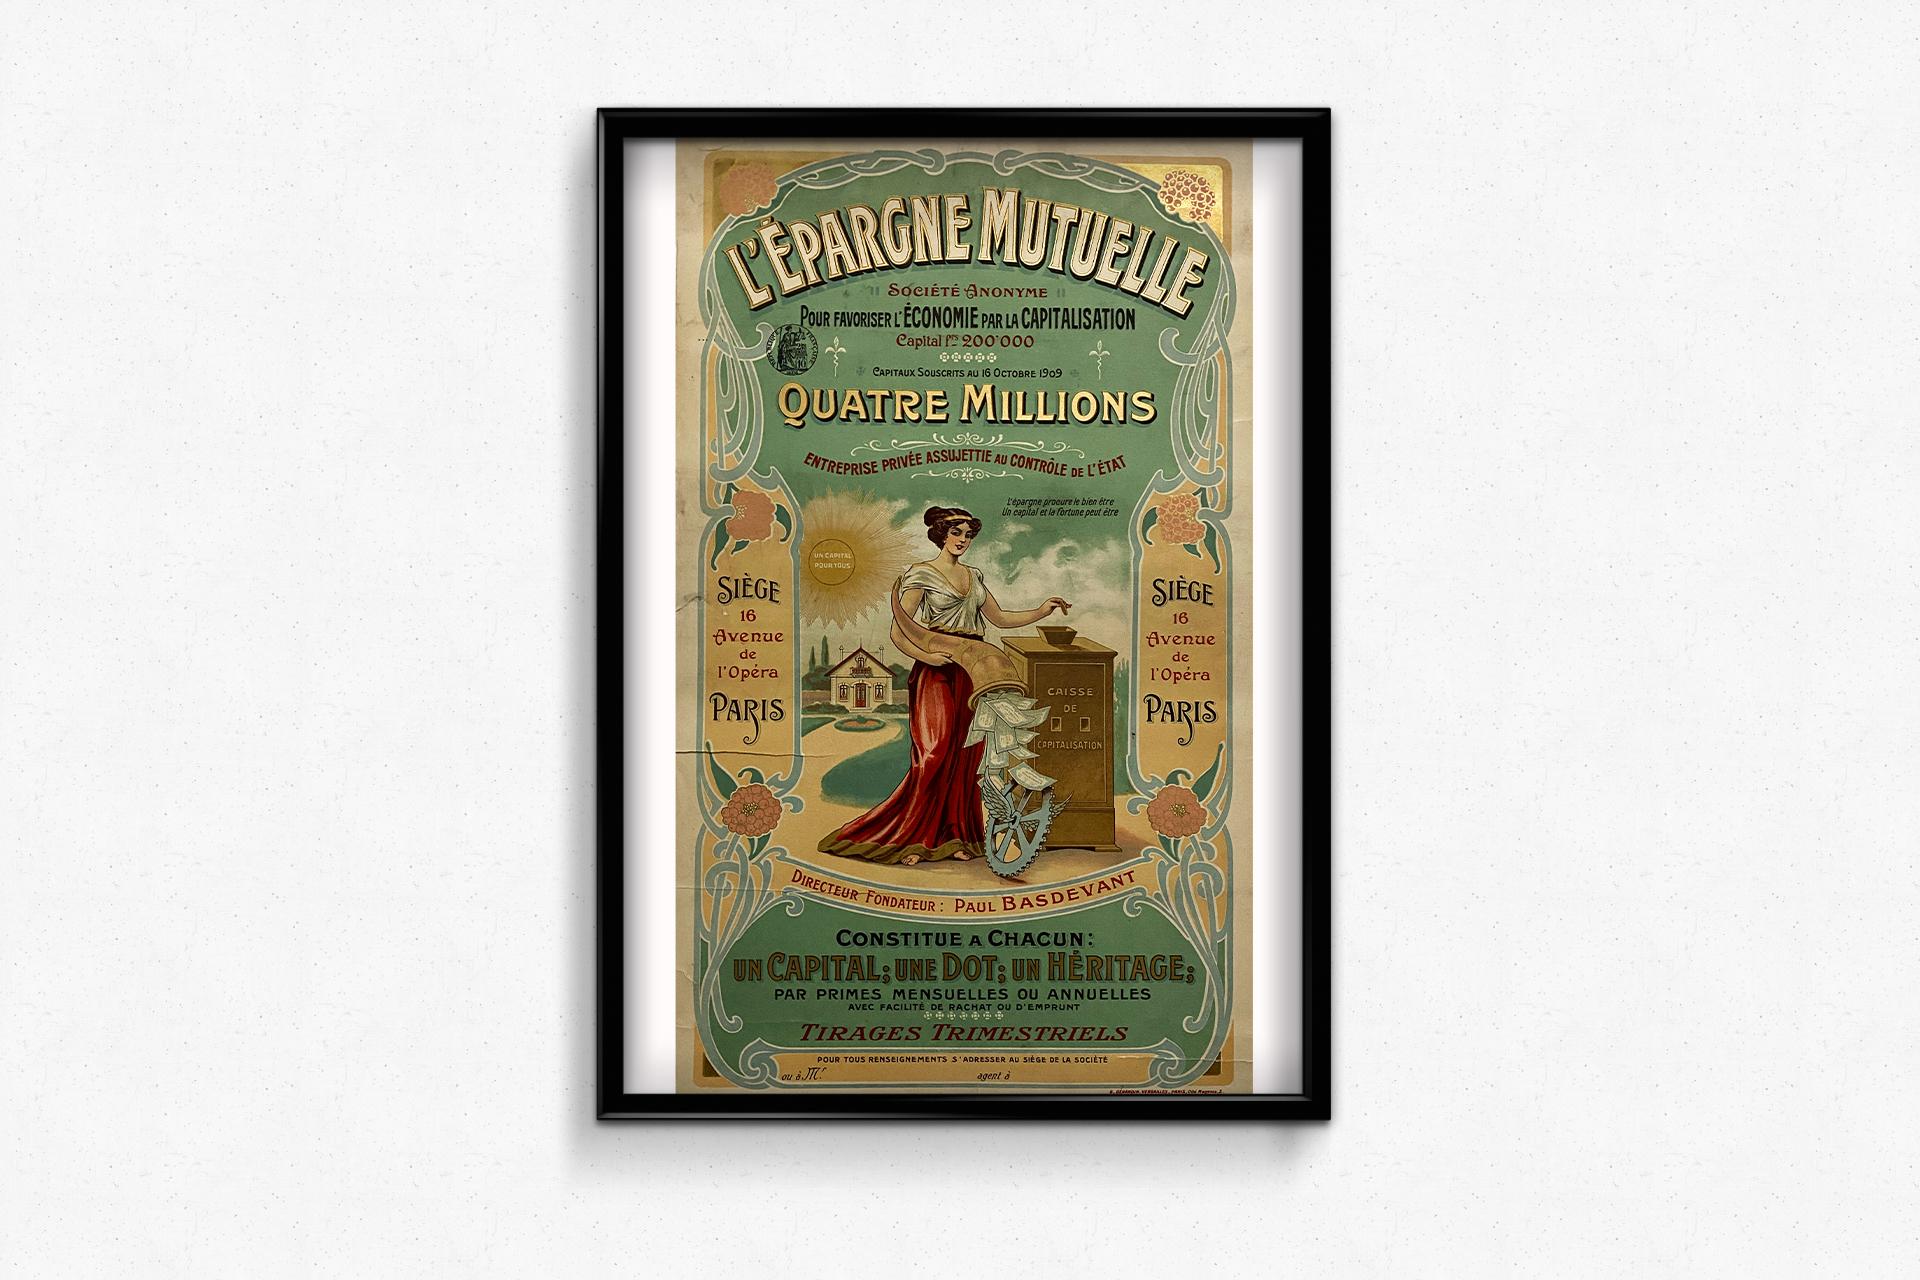 Original poster made around 1910 to promote mutual savings.

At that time, it was important to 